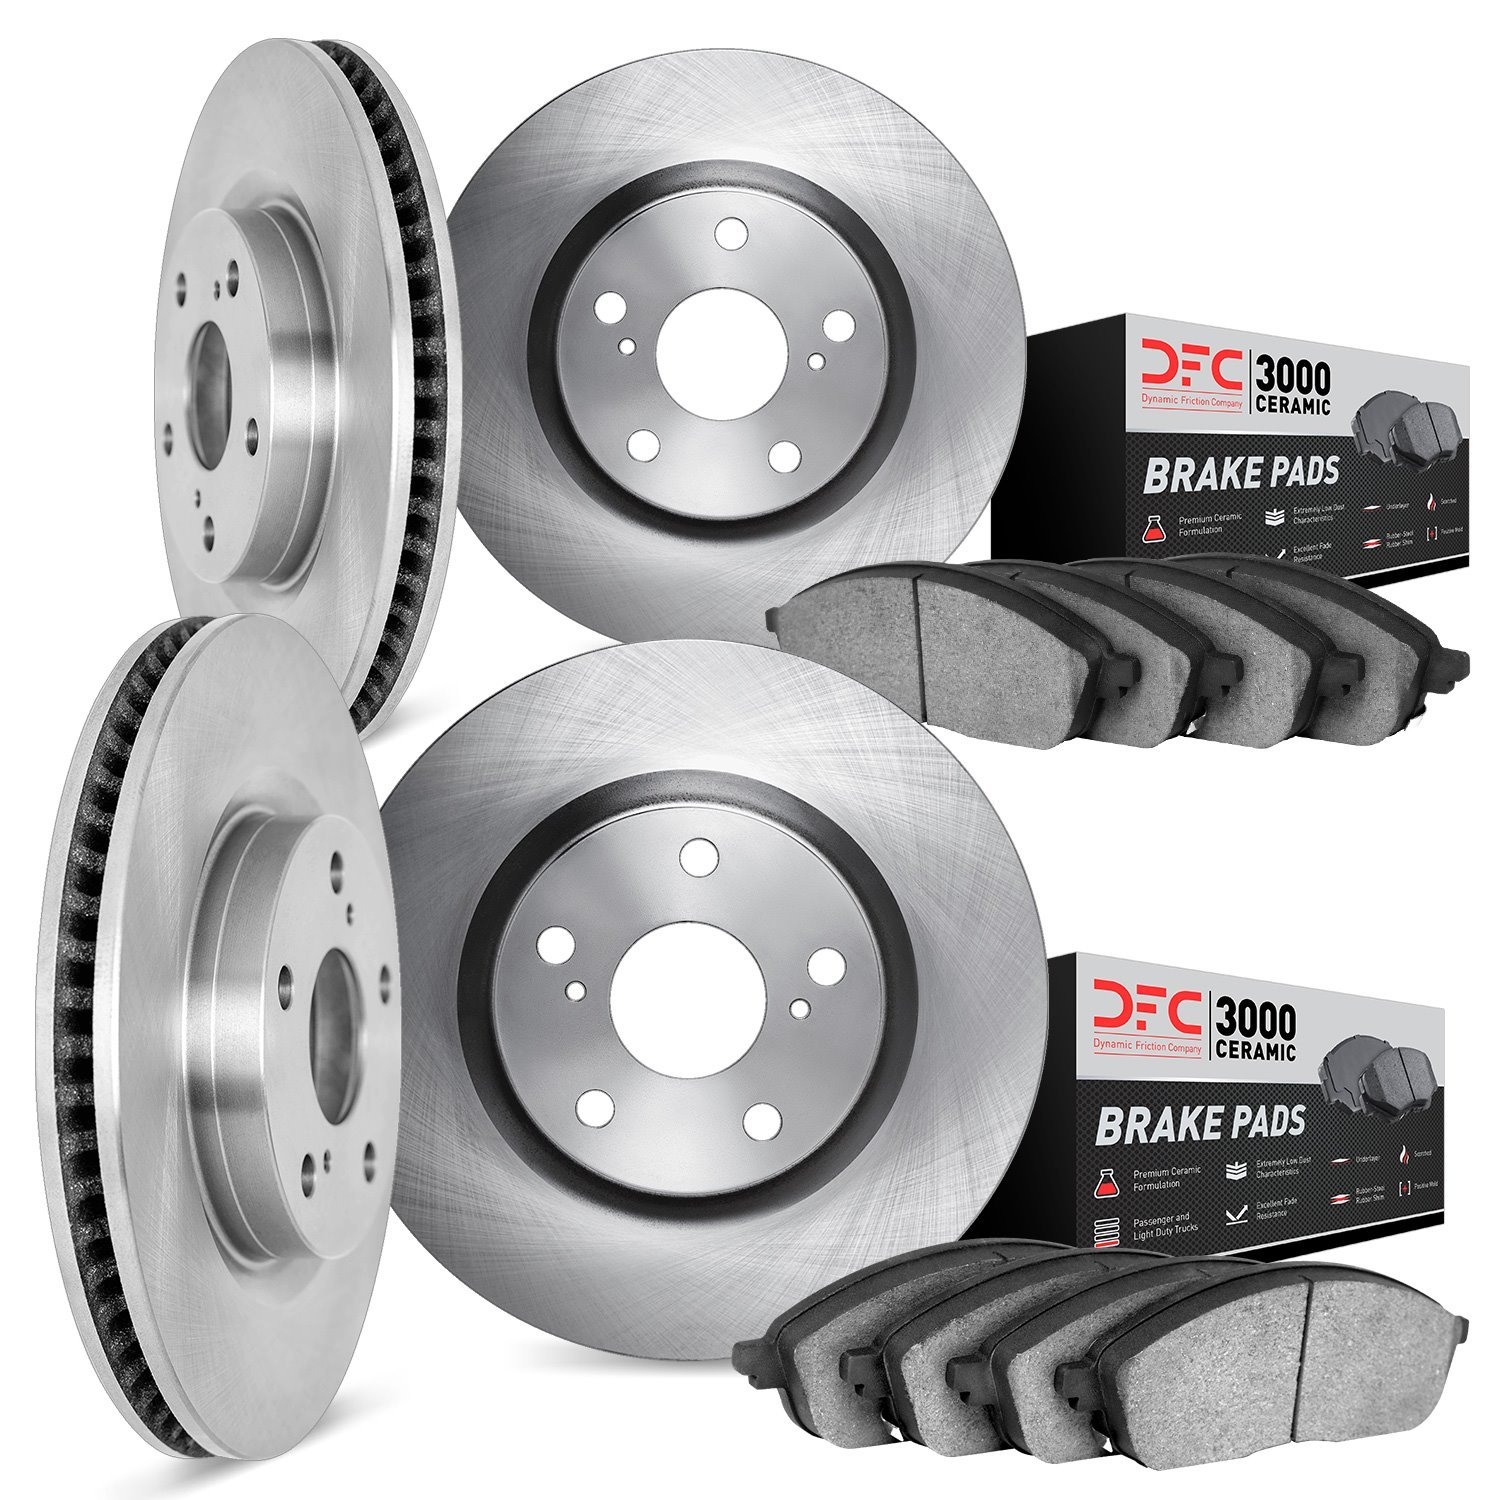 6304-40031 Brake Rotors with 3000-Series Ceramic Brake Pads Kit, Fits Select Mopar, Position: Front and Rear